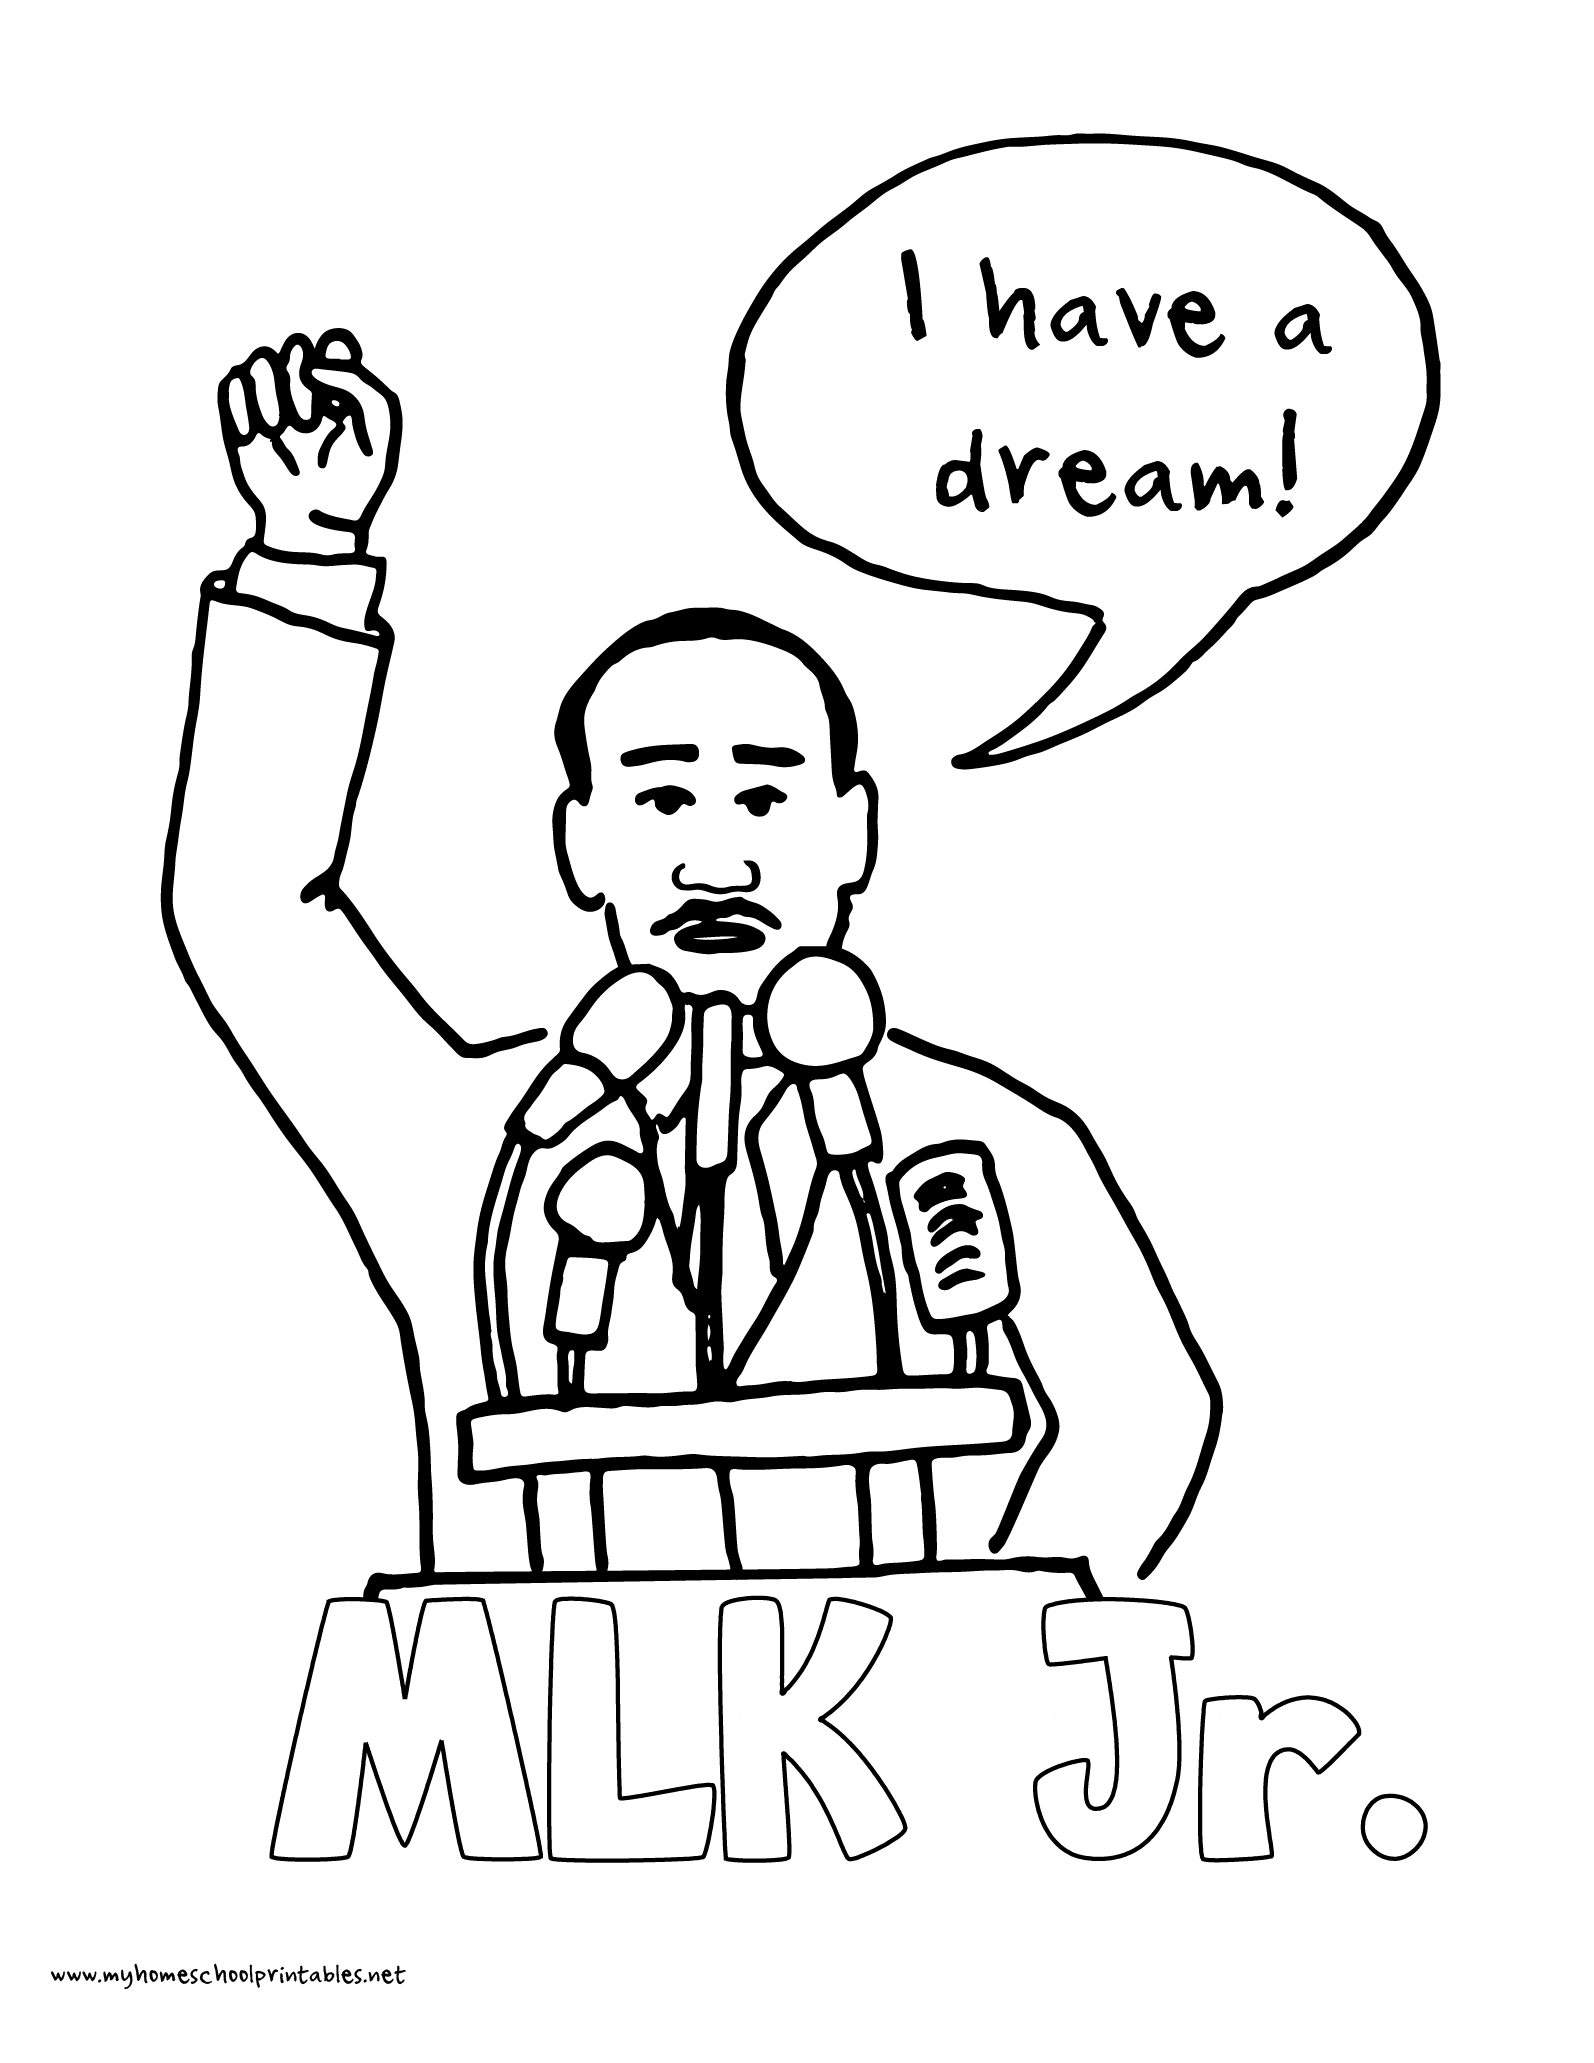 Martin Luther King Coloring Pages Printable At tout Martin Luther King Coloring Pages